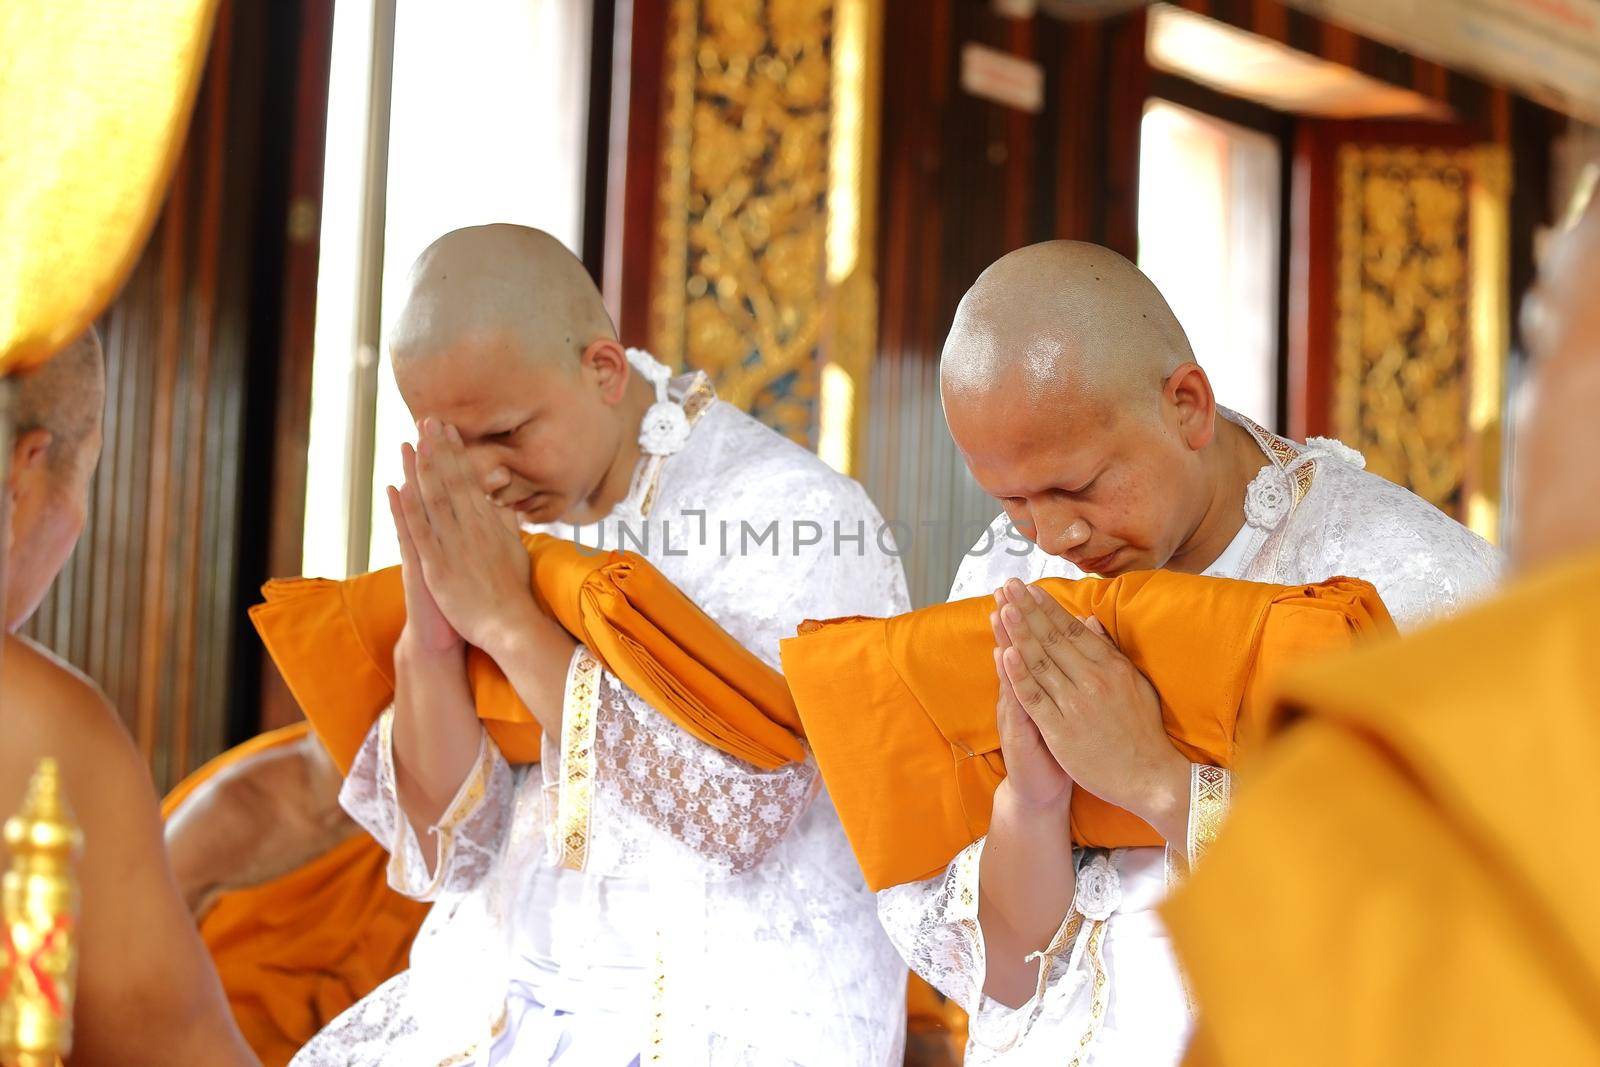 the ordination ceremony of the new monk by geargodz